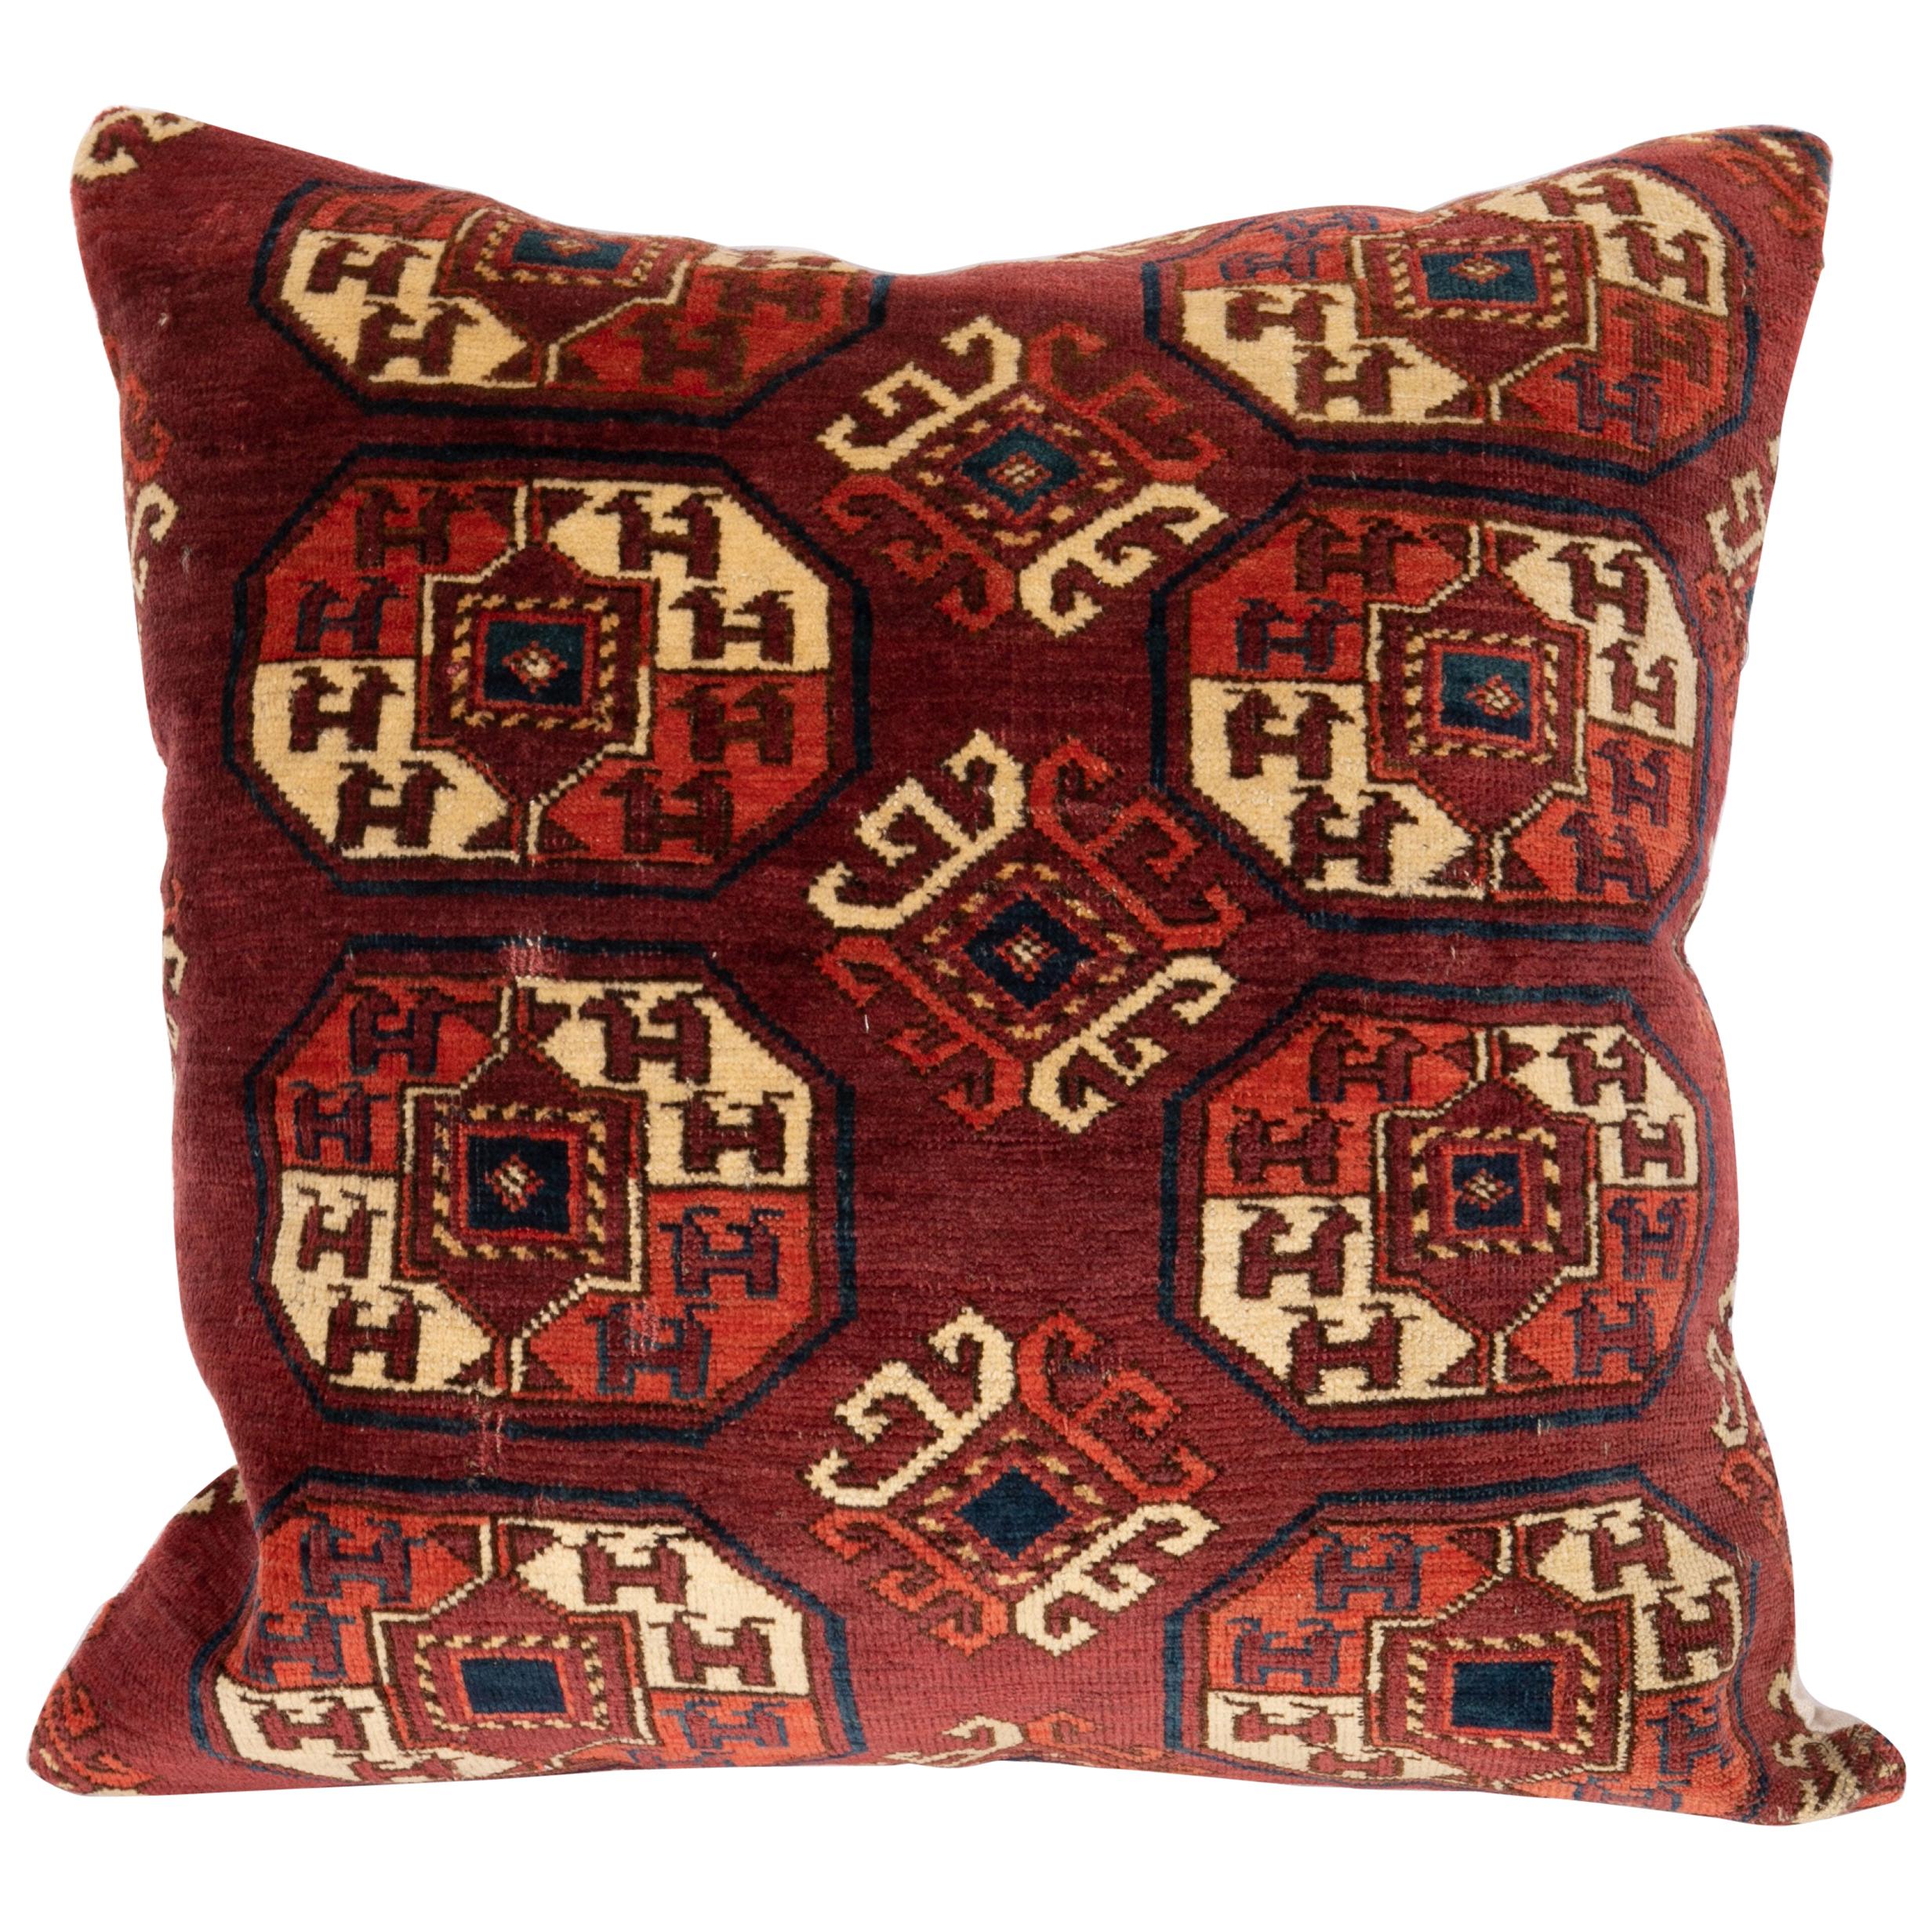 Antique Turkmen Large Rug Pillow Case Made from a 19th Century Turkmen Main Rug